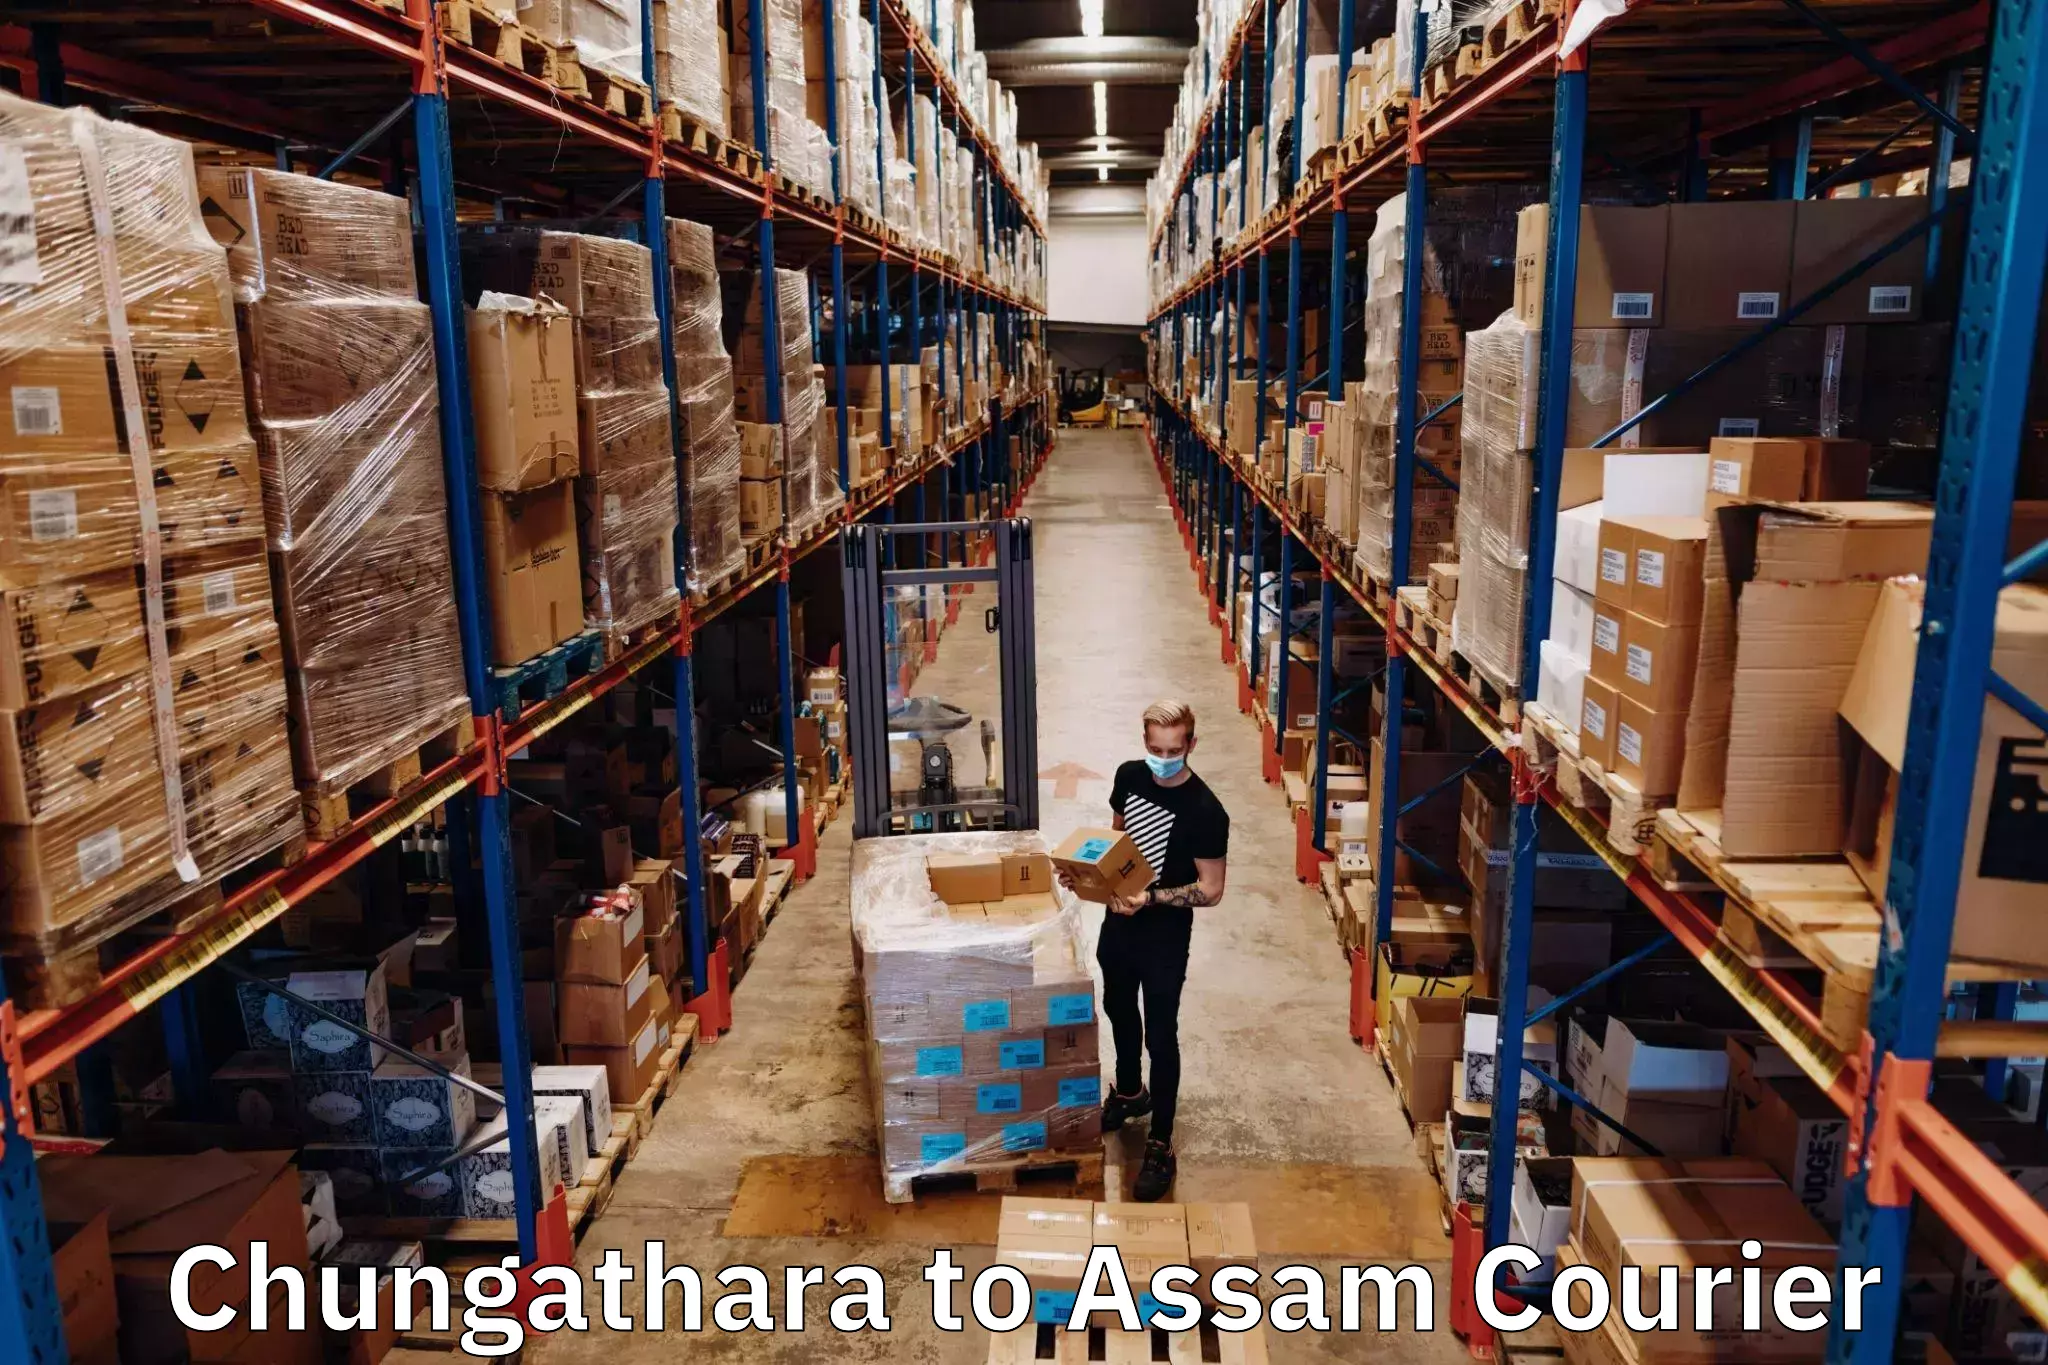 Courier service efficiency Chungathara to Lala Assam